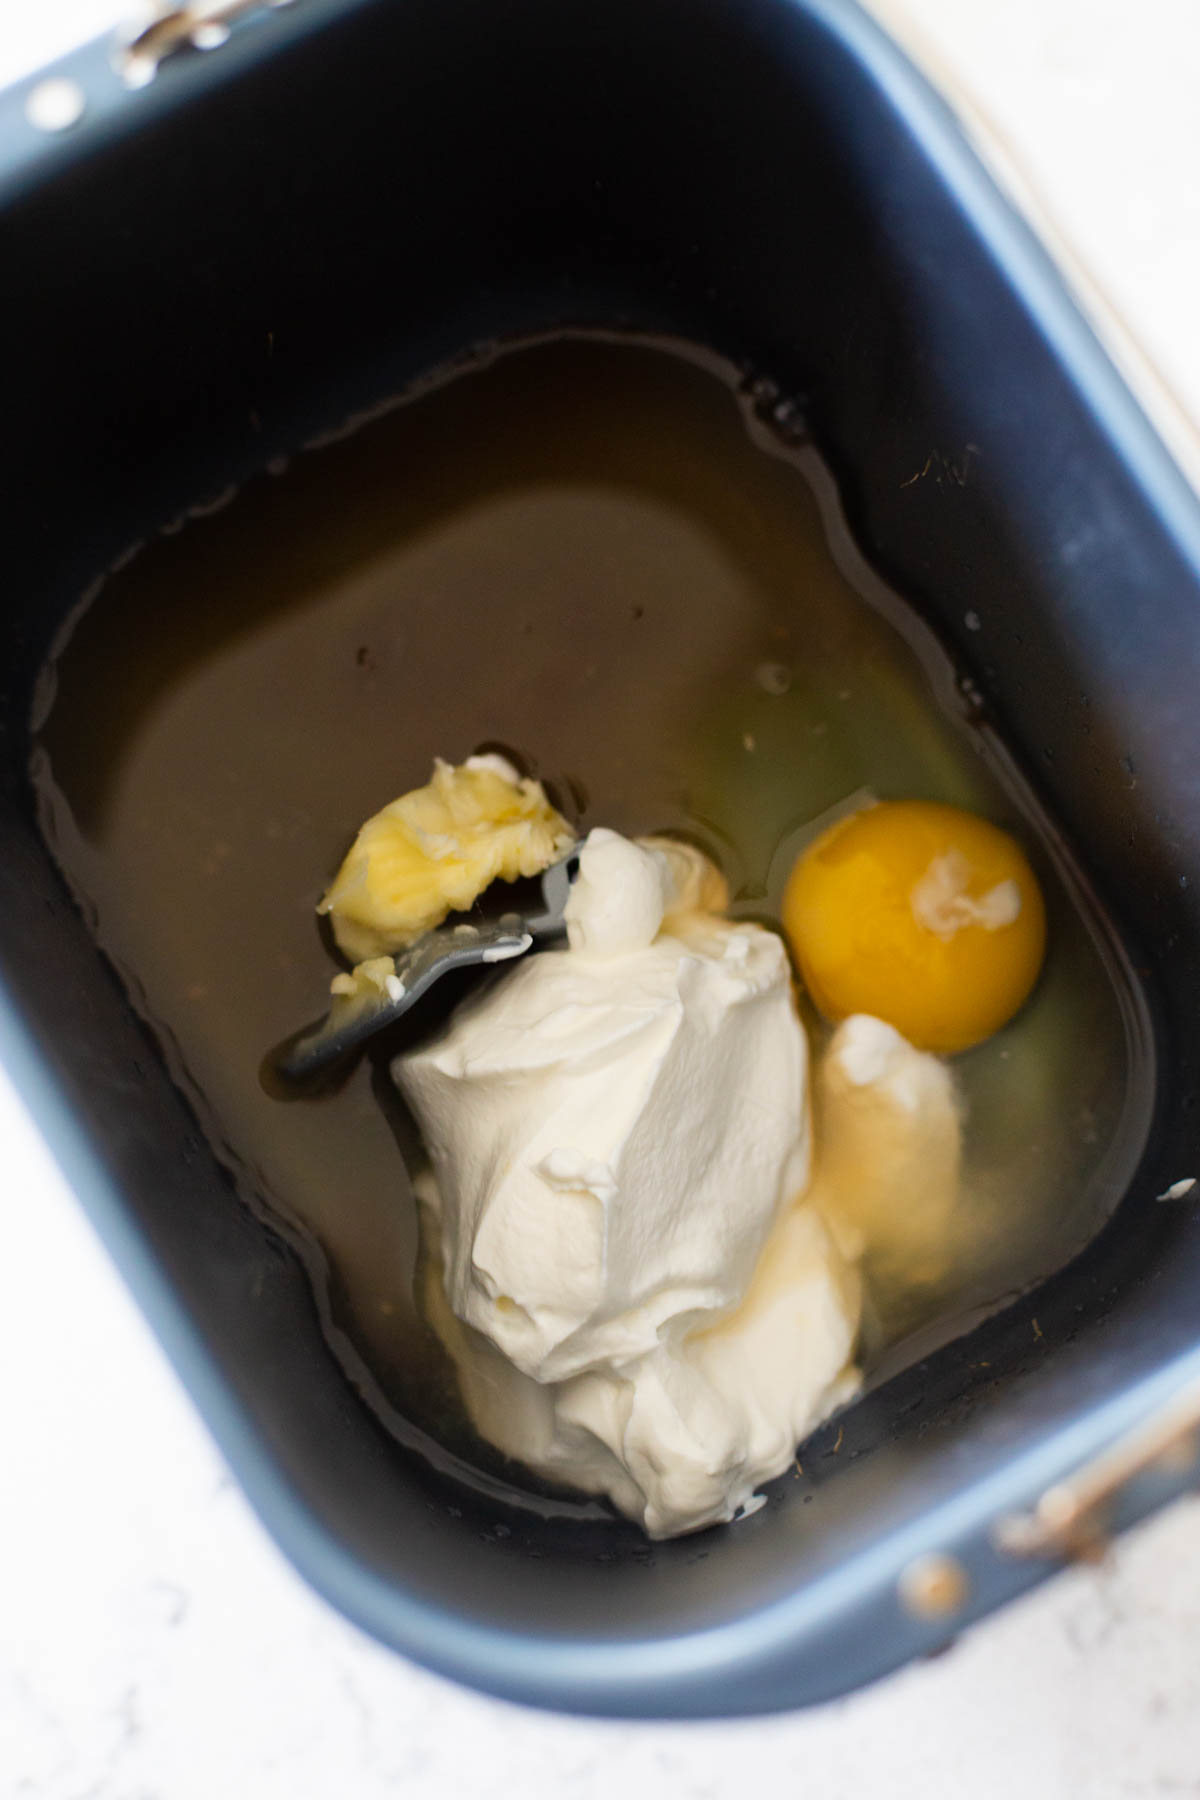 The bread pan is filled with the wet ingredients including eggs and sour cream.